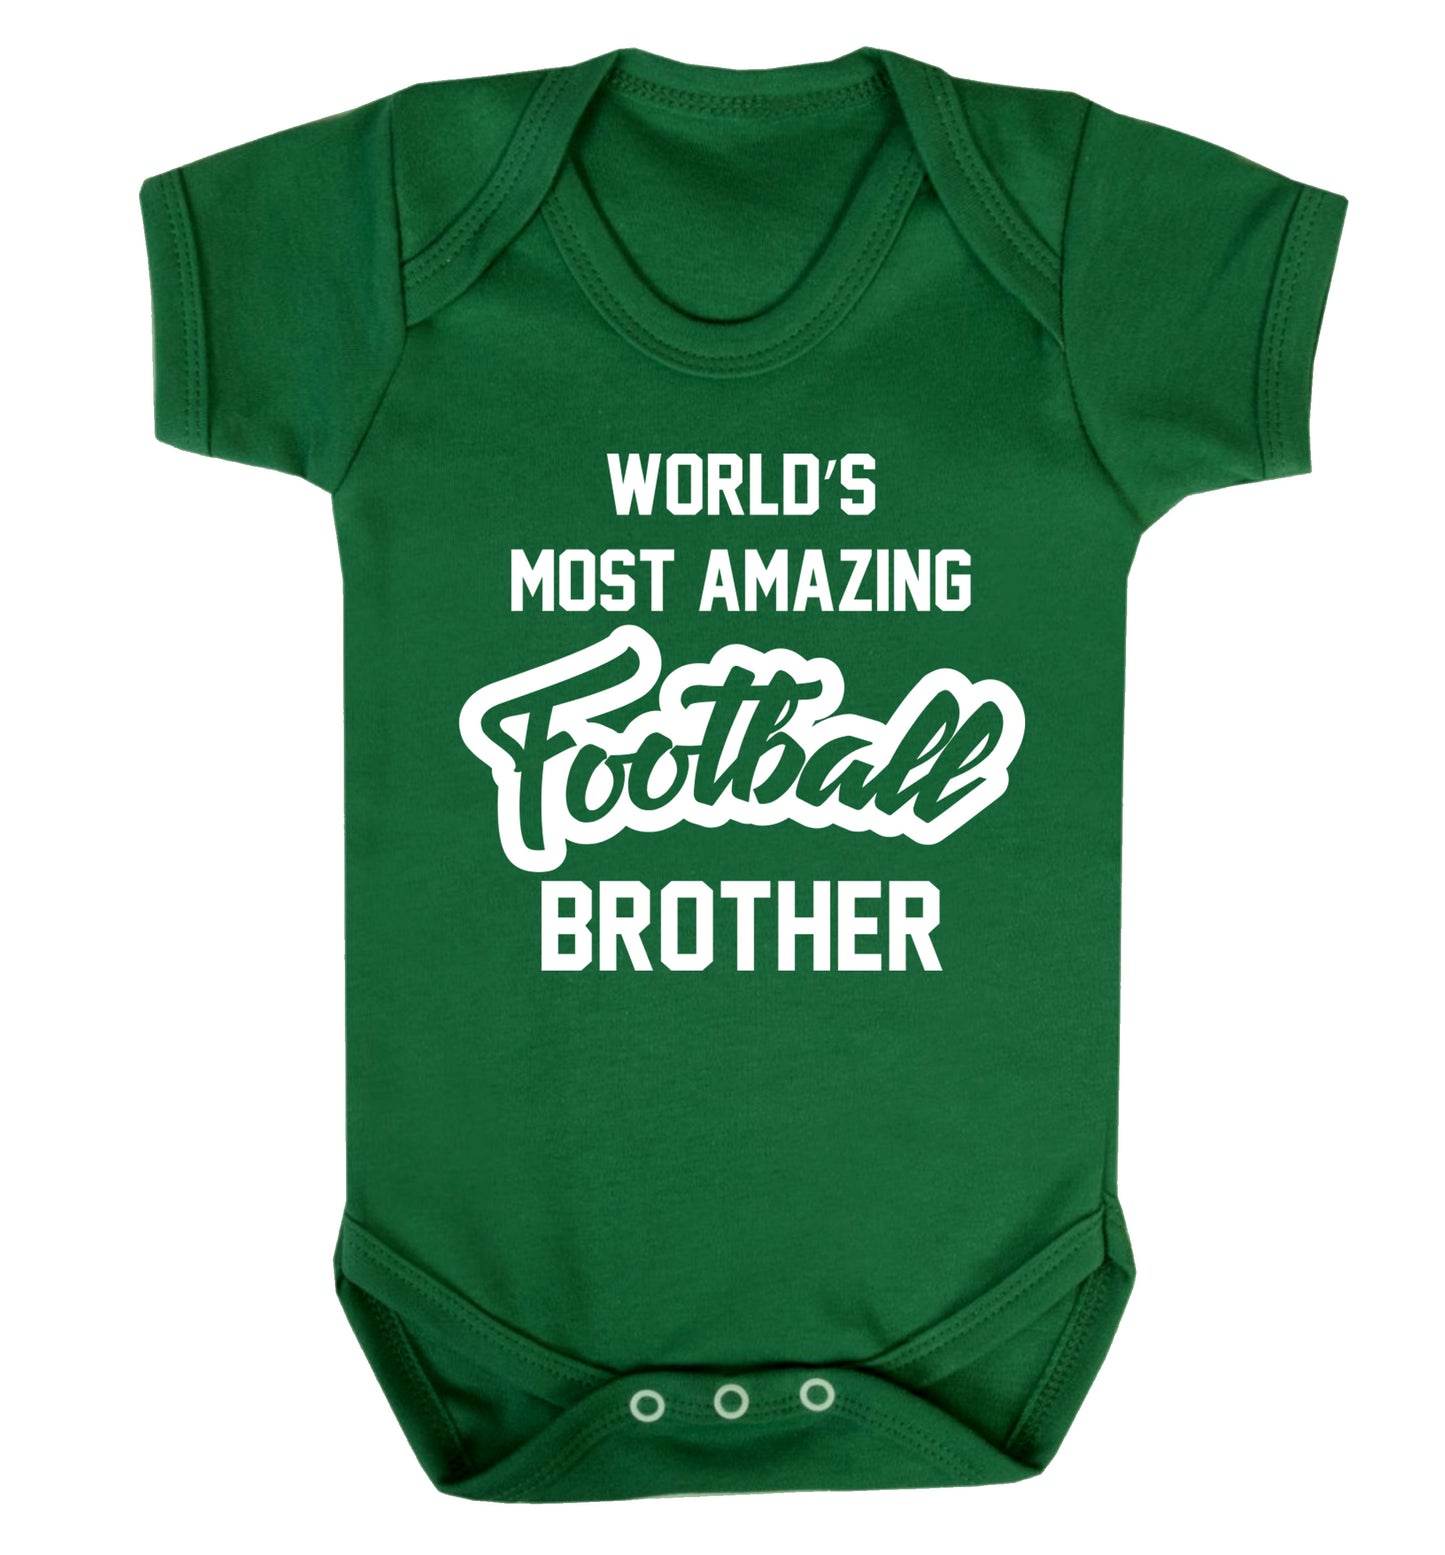 Worlds most amazing football brother Baby Vest green 18-24 months